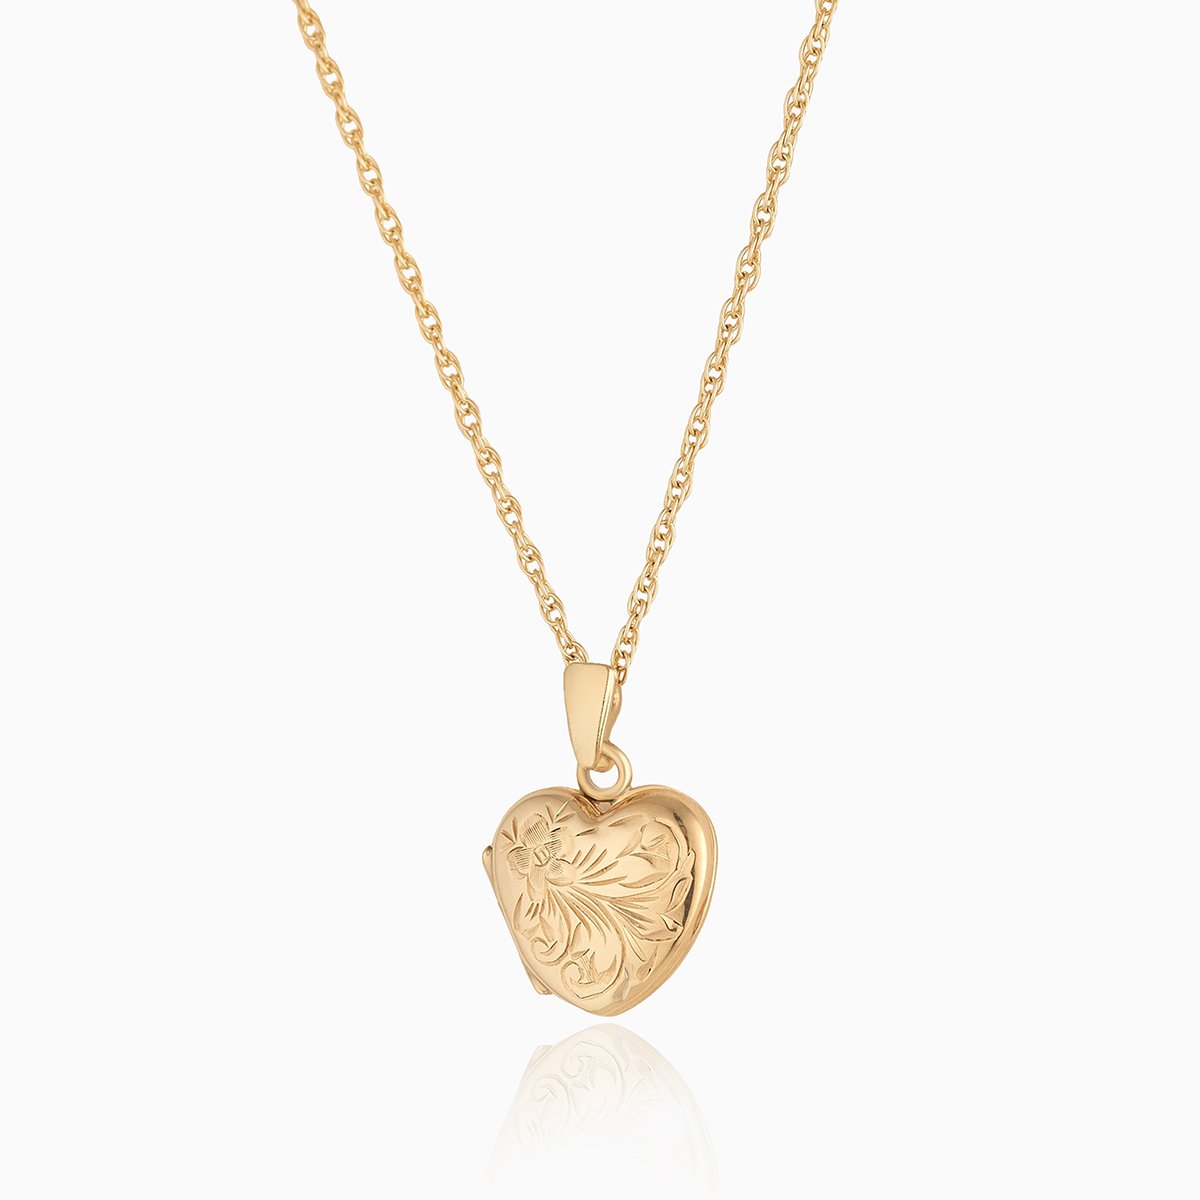 Petite 9 ct gold floral engraved locket on a 9 ct gold rope chain